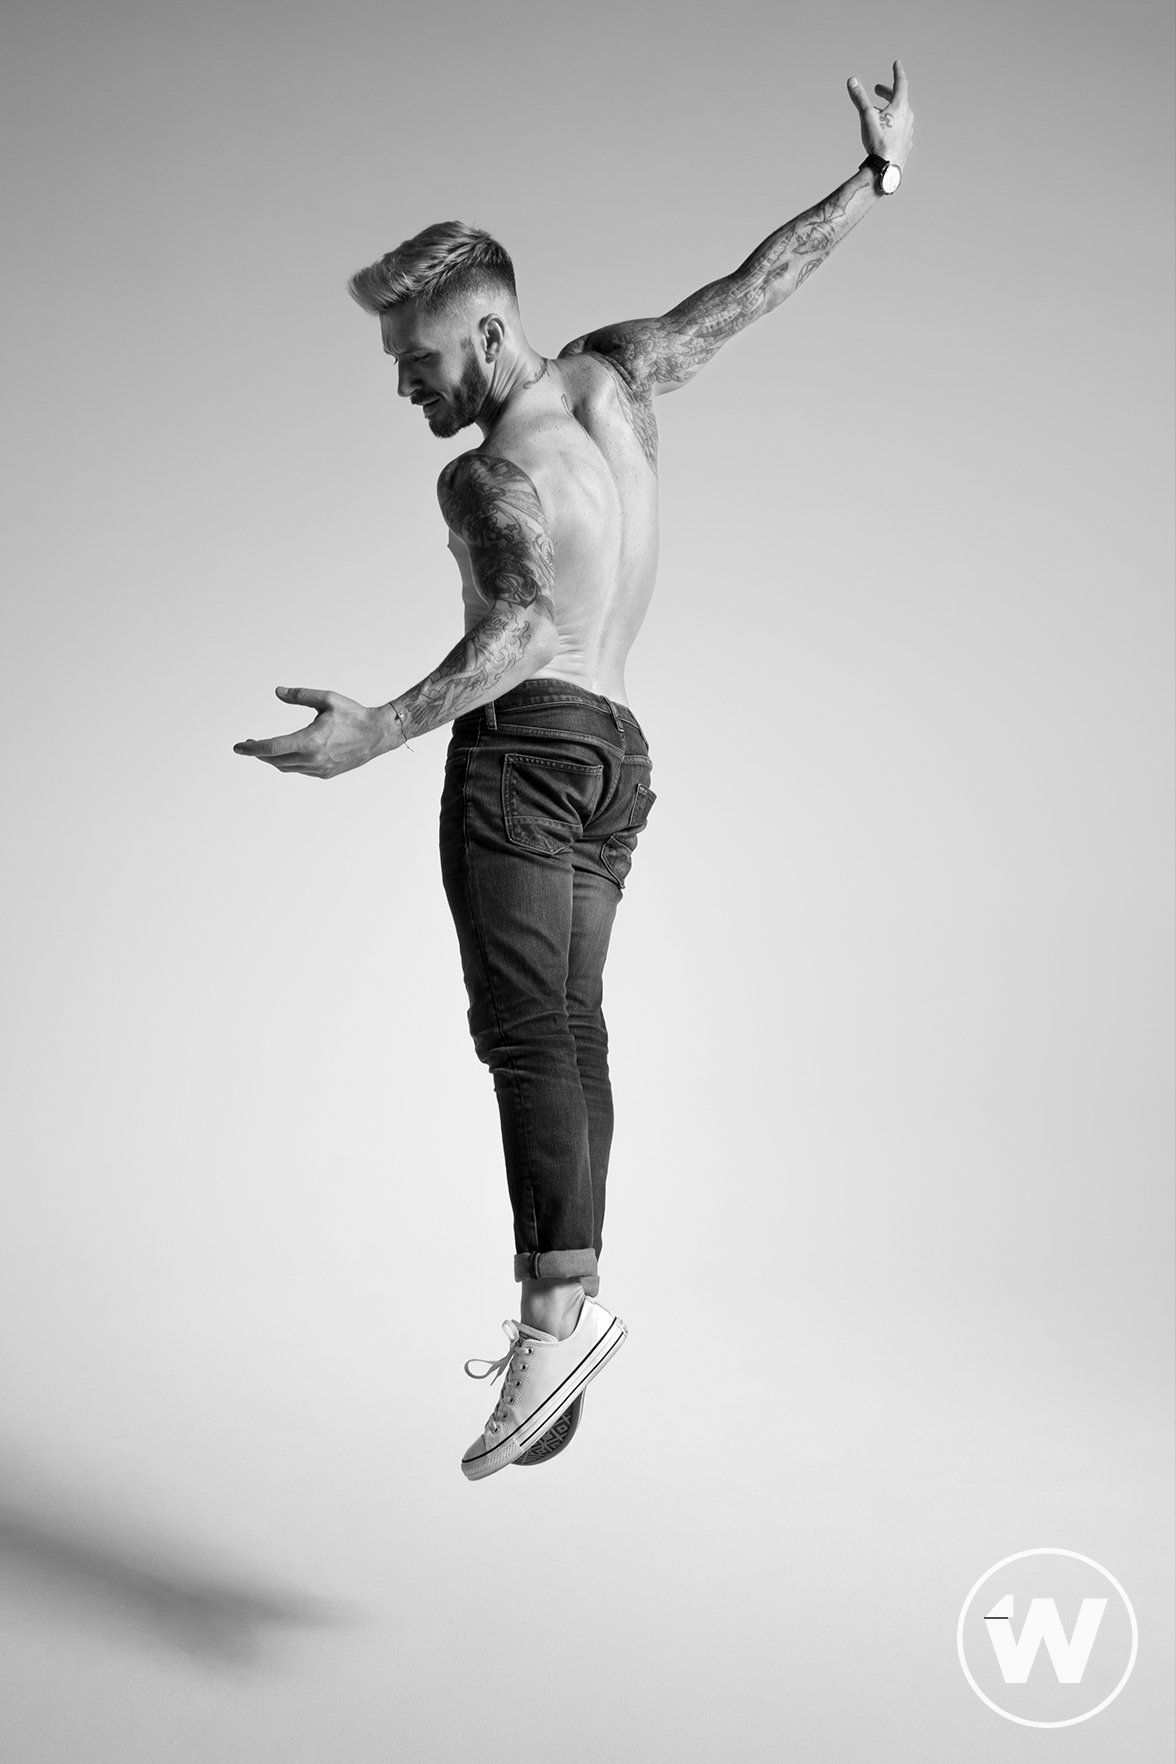 'So You Think You Can Dance' Star Travis Wall Portraits (Exclusive Photos)